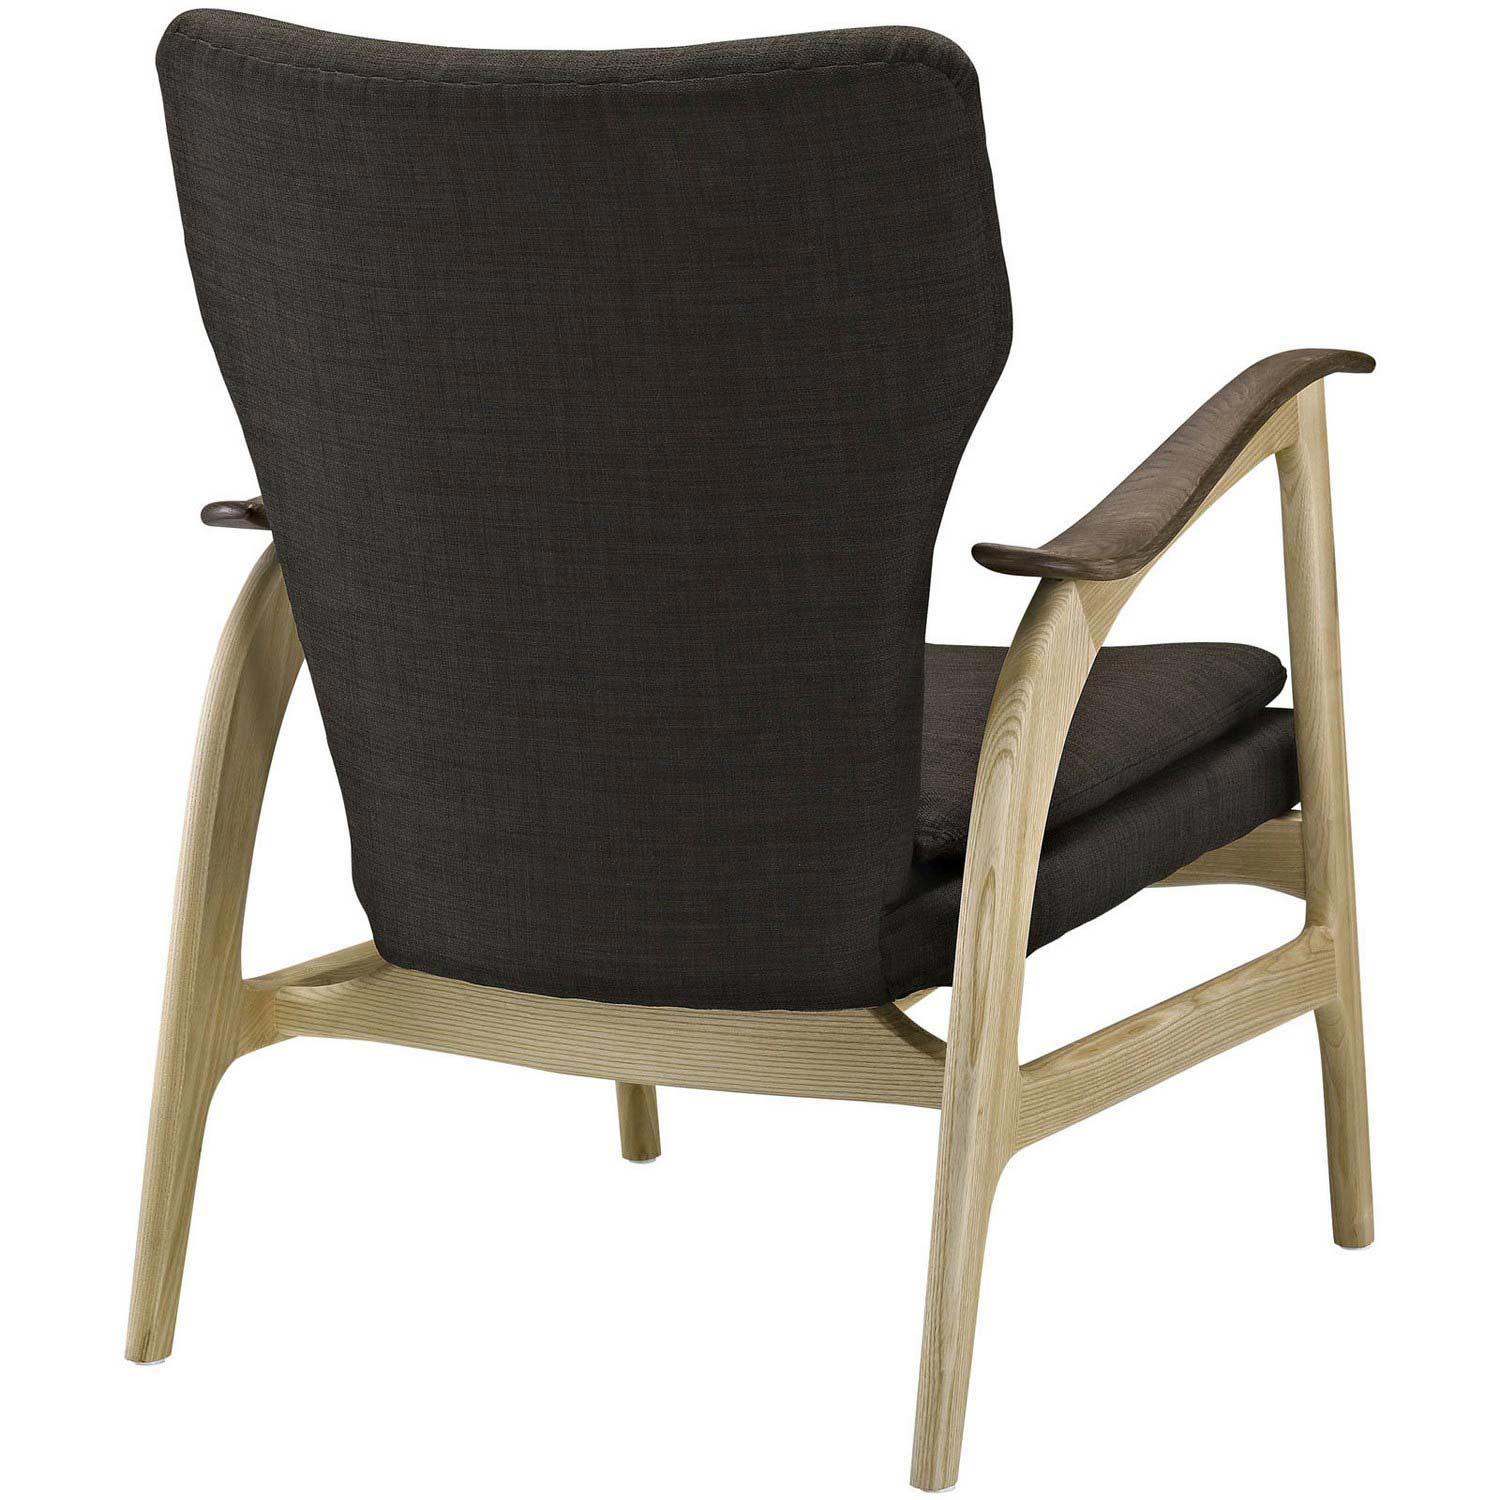 Modway Counsel Lounge Chair - Natural Brown